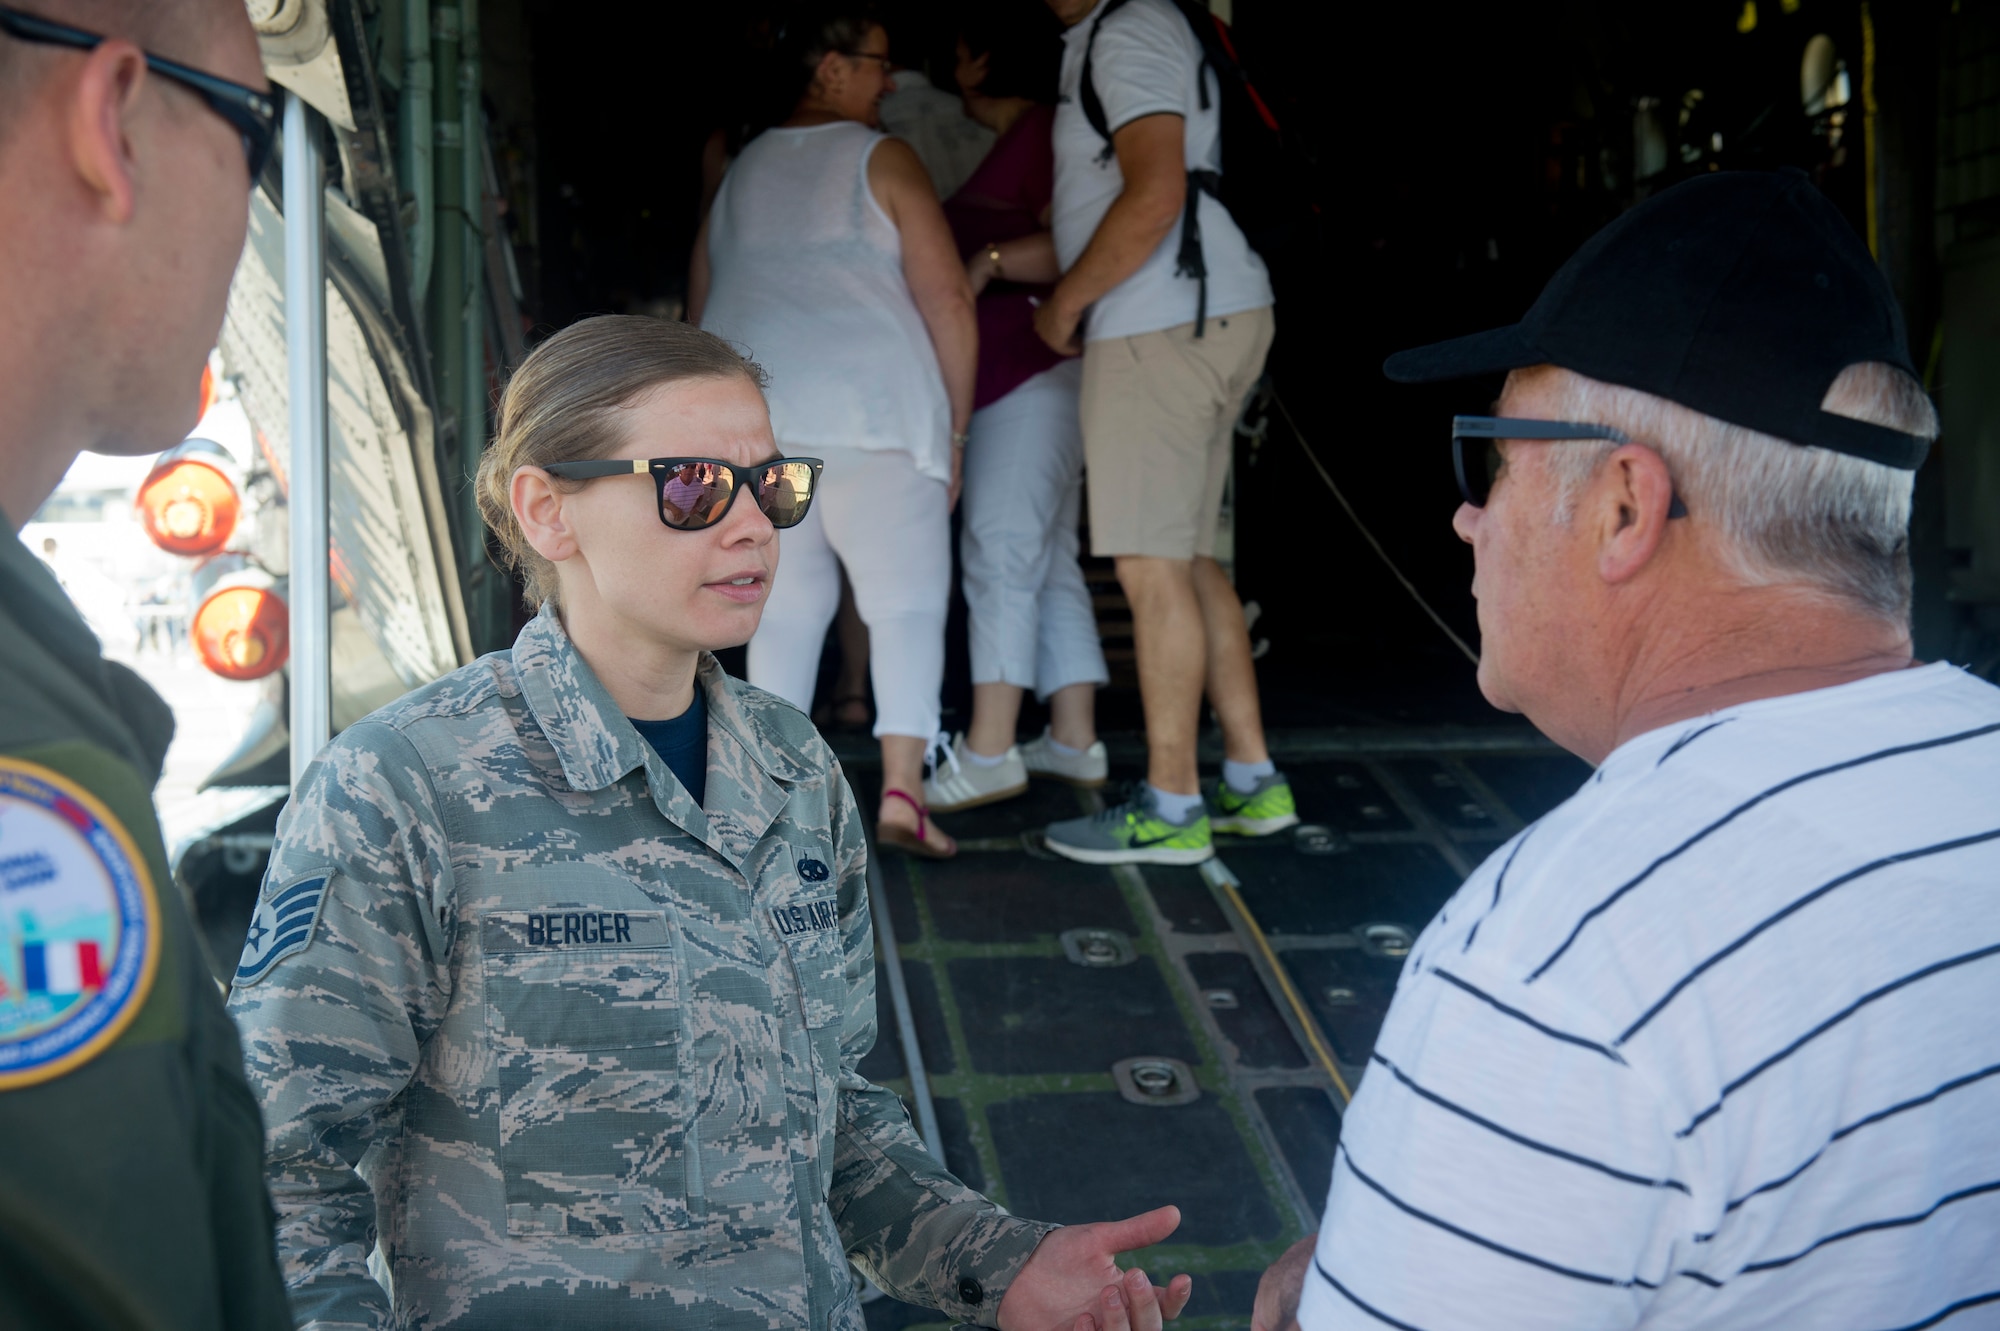 U.S. Air National Guard Staff Sgt. Jennatte Berger, an avionics technician from the 109th Airlift Wing at Stratton Air National Guard Base in Scotia, N.Y., engages with visitors during the Paris Air Show, June 22, 2019. The air show provided a collaborative opportunity to share and strengthen U.S. and strategic international partnerships. (U.S. Air Force photo by Master Sgt. Eric Burks)